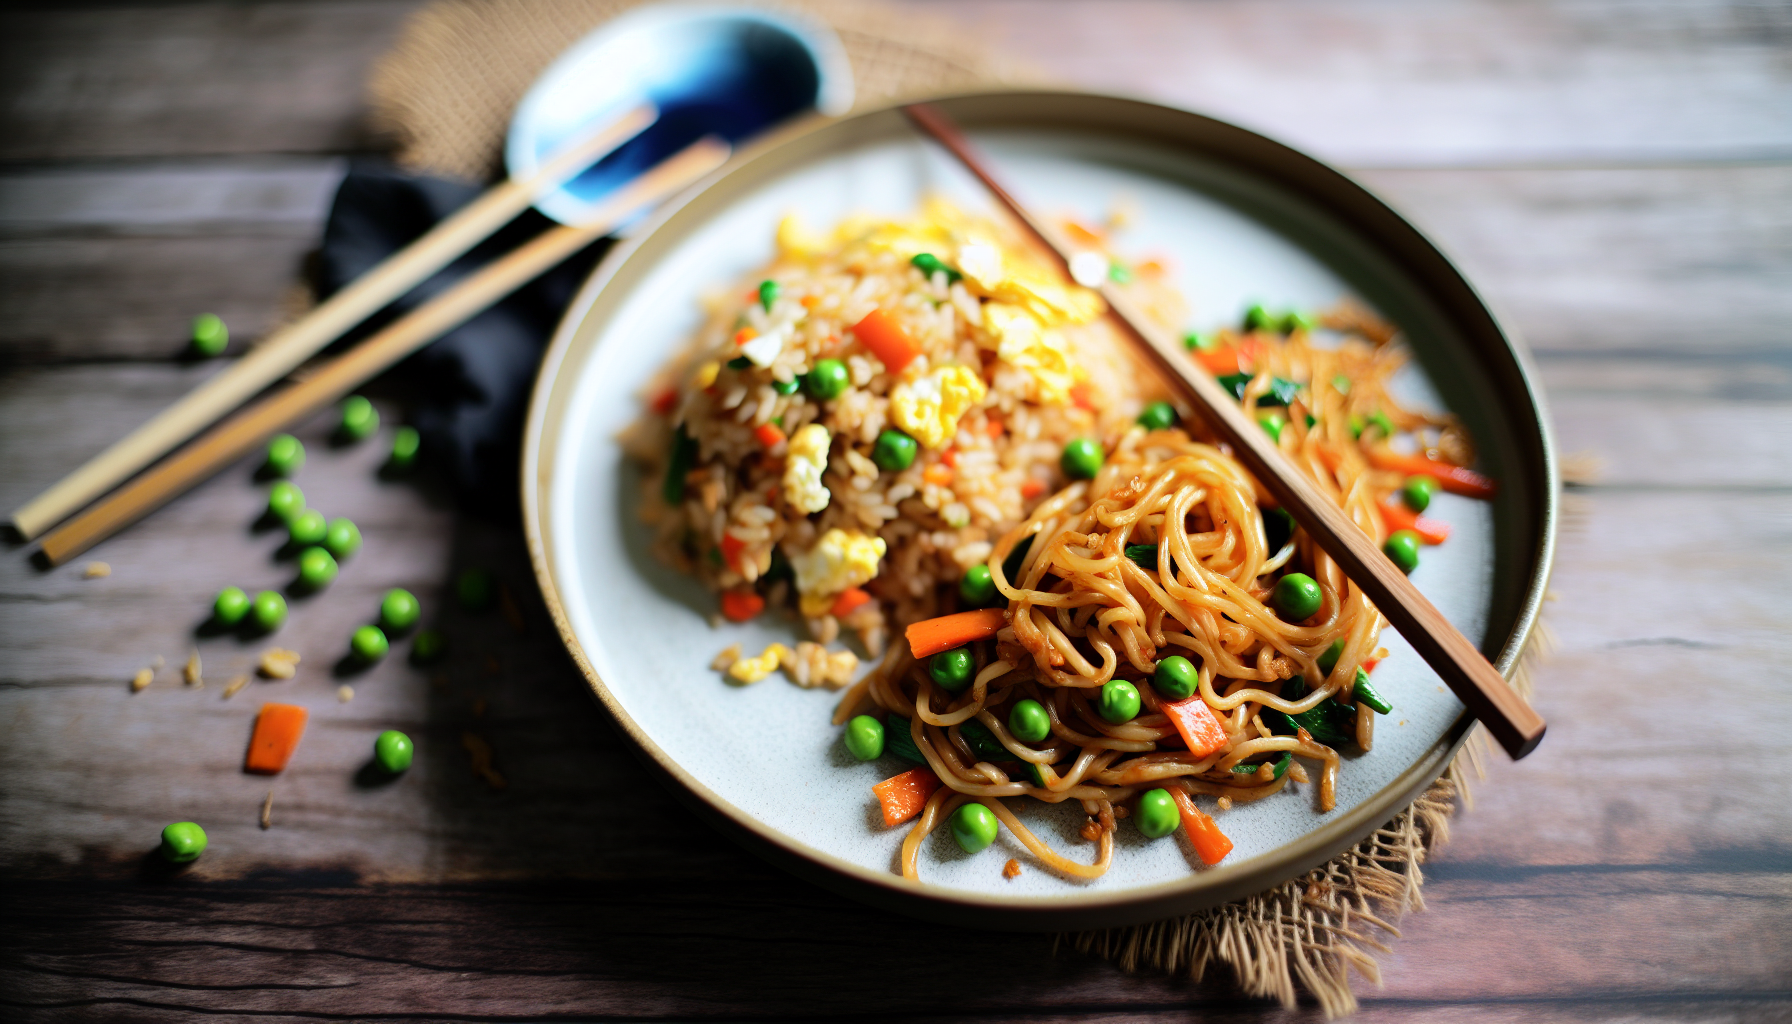 Flash-Fried Rice & Noodles recipes